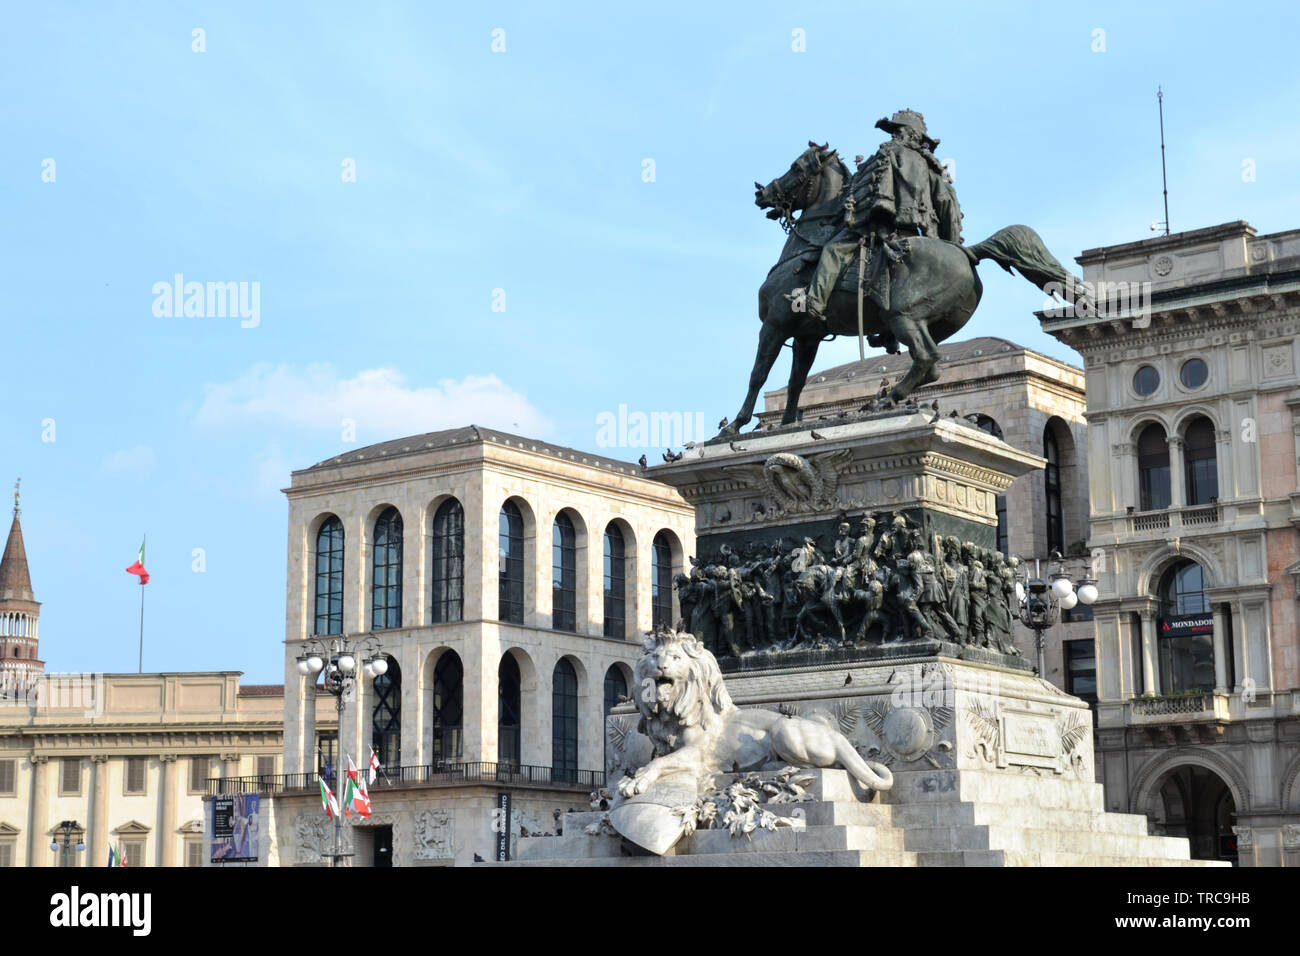 Milan/Italy - June 1, 2015: View to monument to king Vittorio Emanuele II, Royal Palace and XIX century museum at Duomo square in sunny summer day. Stock Photo